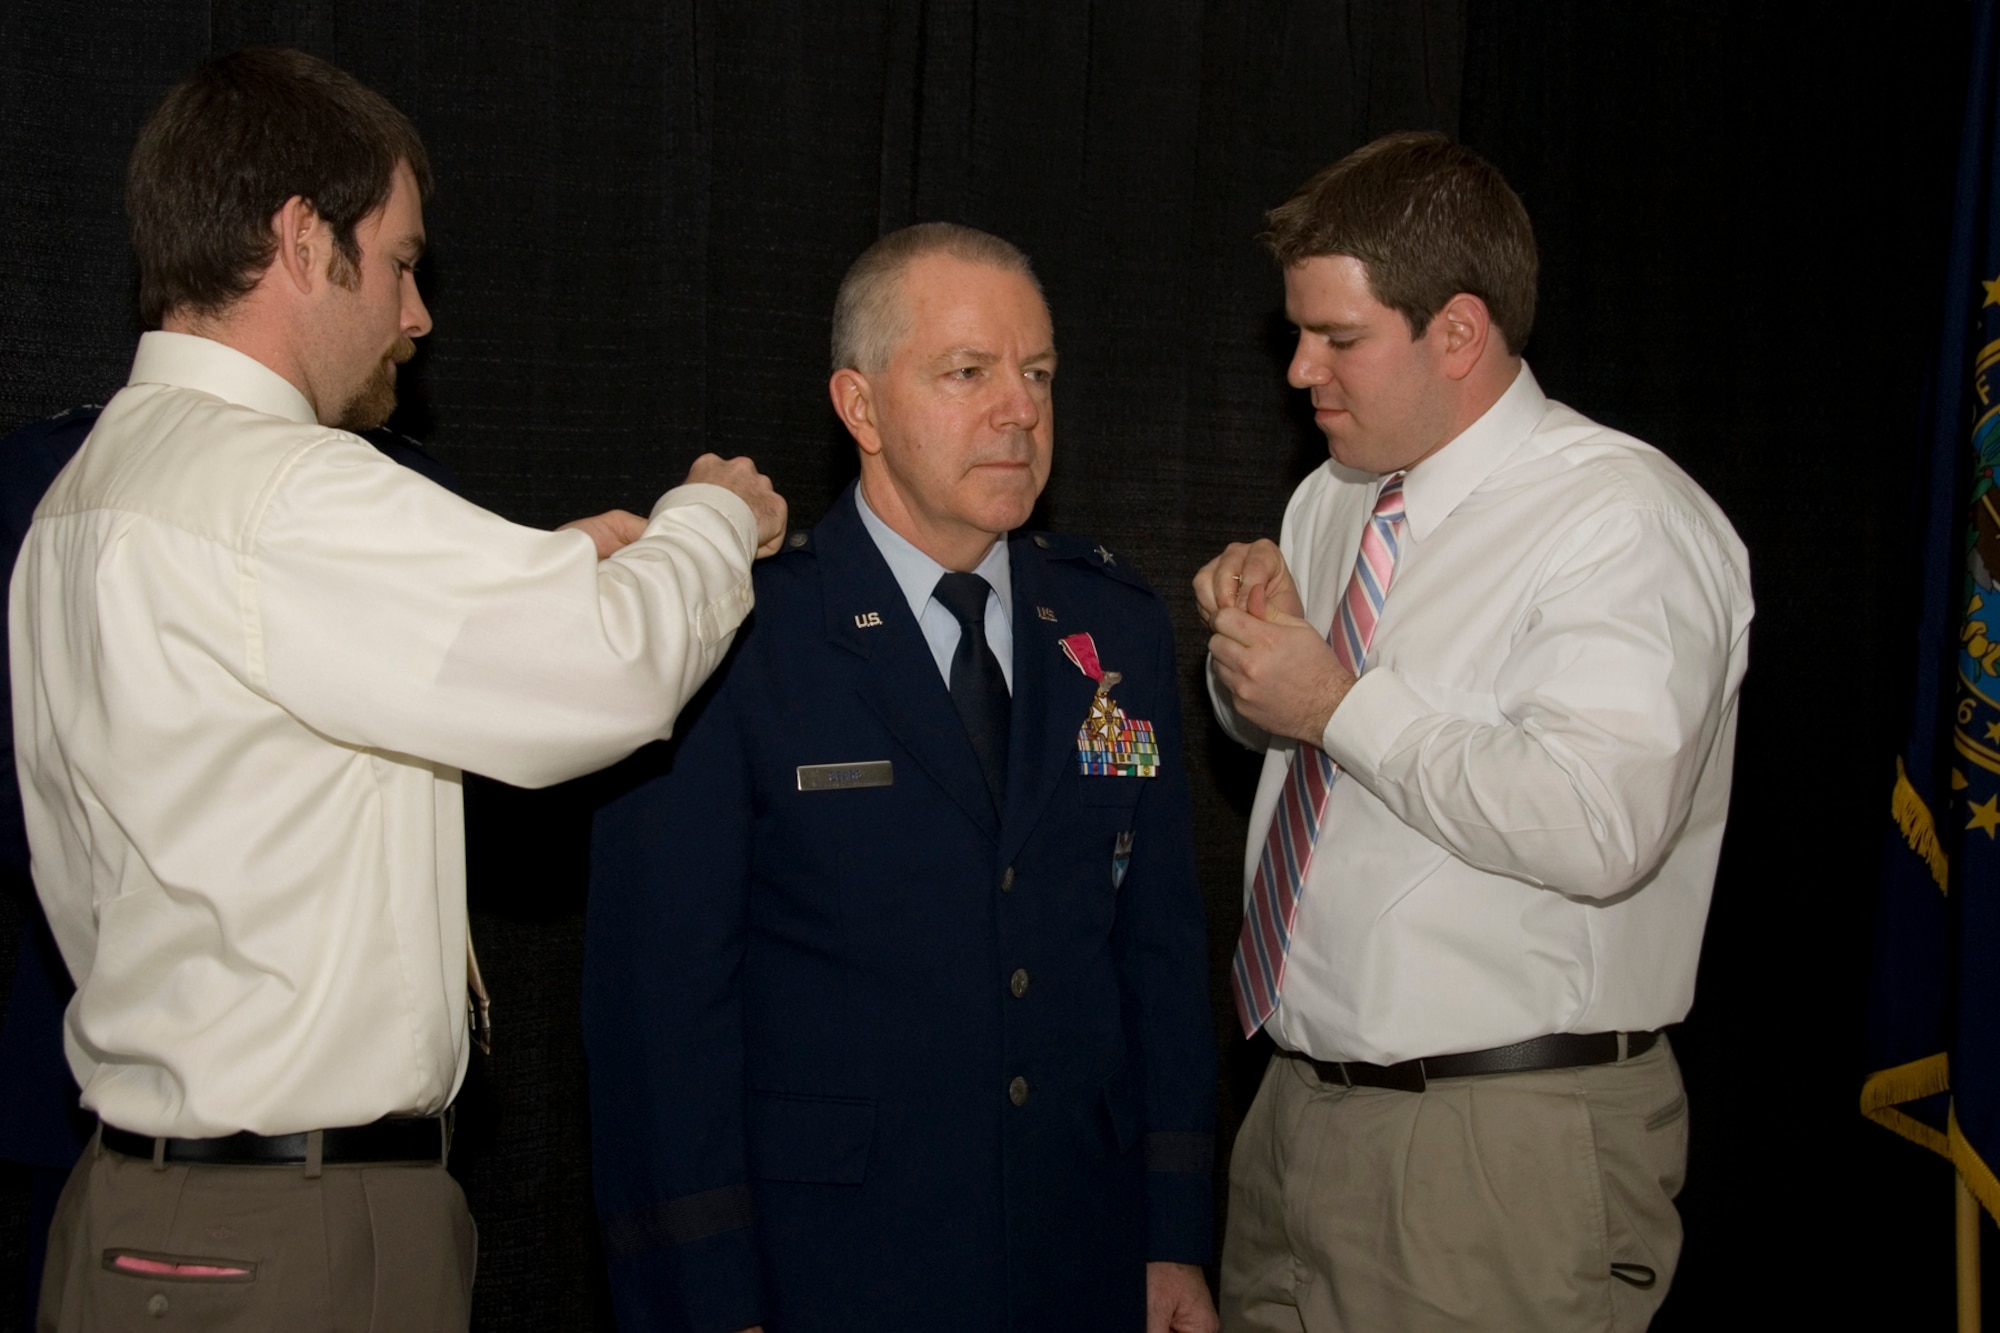 Ian Sears (left) and Adam Sears (right) help pin stars on their father, Major General Mark Sears during his promotion ceremony at Pease Air National Guard Base, New Hampshire on May 1, 2010. Sears, former Commander of the N.H.A.N.G. was recently promoted and is currently assigned as Deputy Commander for Mobilization and Reserve Affairs, United States Southern Command in Miami, Florida.  (U.S. Air Force photo/Staff Sgt. Curtis J. Lenz)